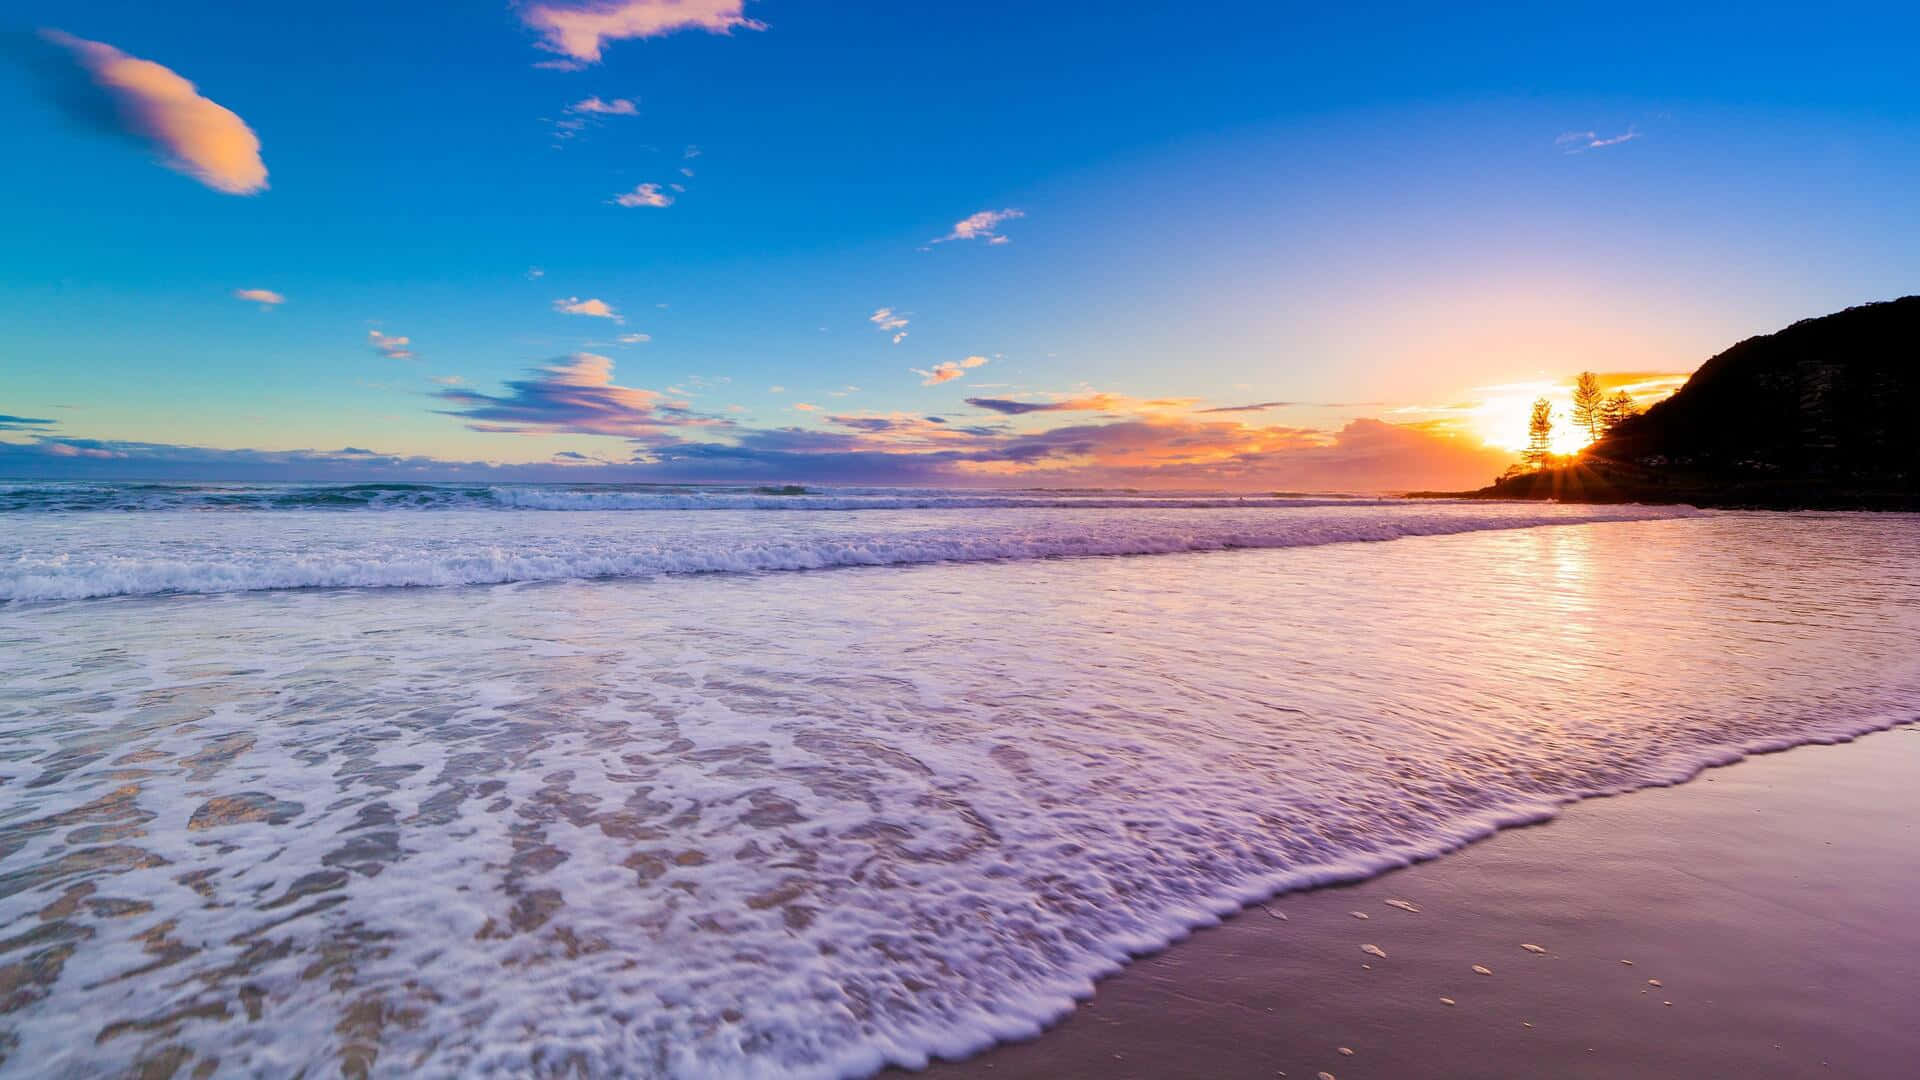 Relish in the beauty of a beach sunset Wallpaper